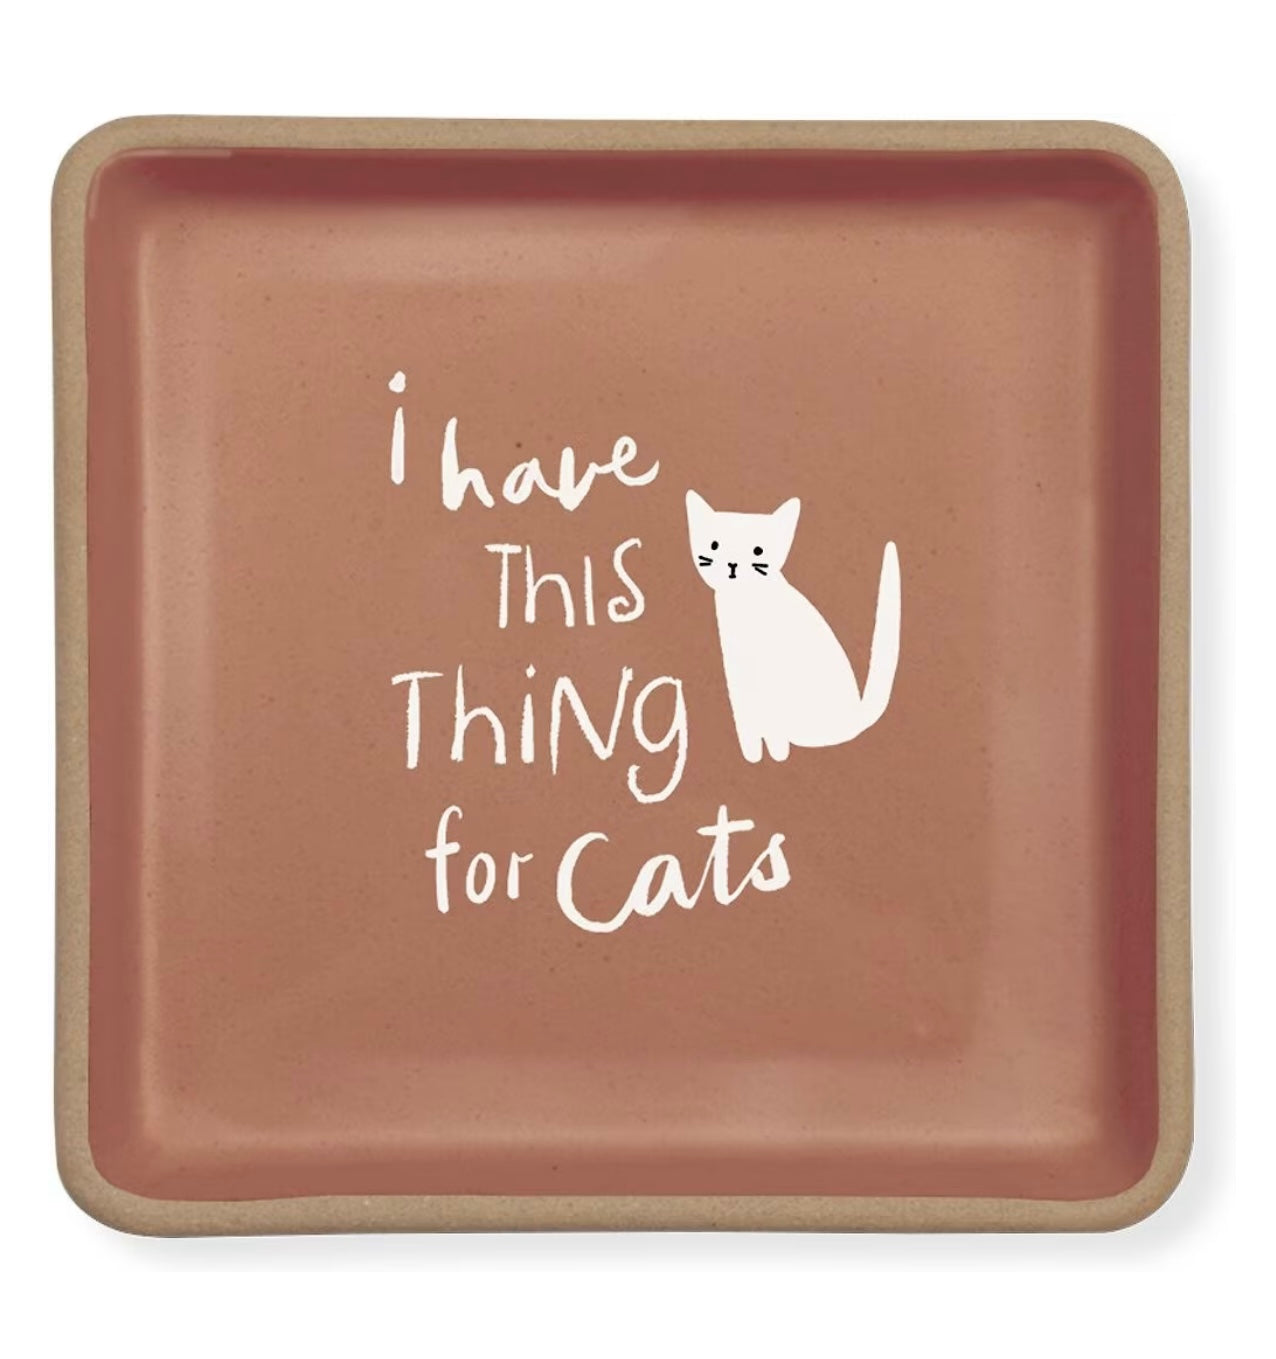 “I Have This Thing For Cats” Trinket Dish